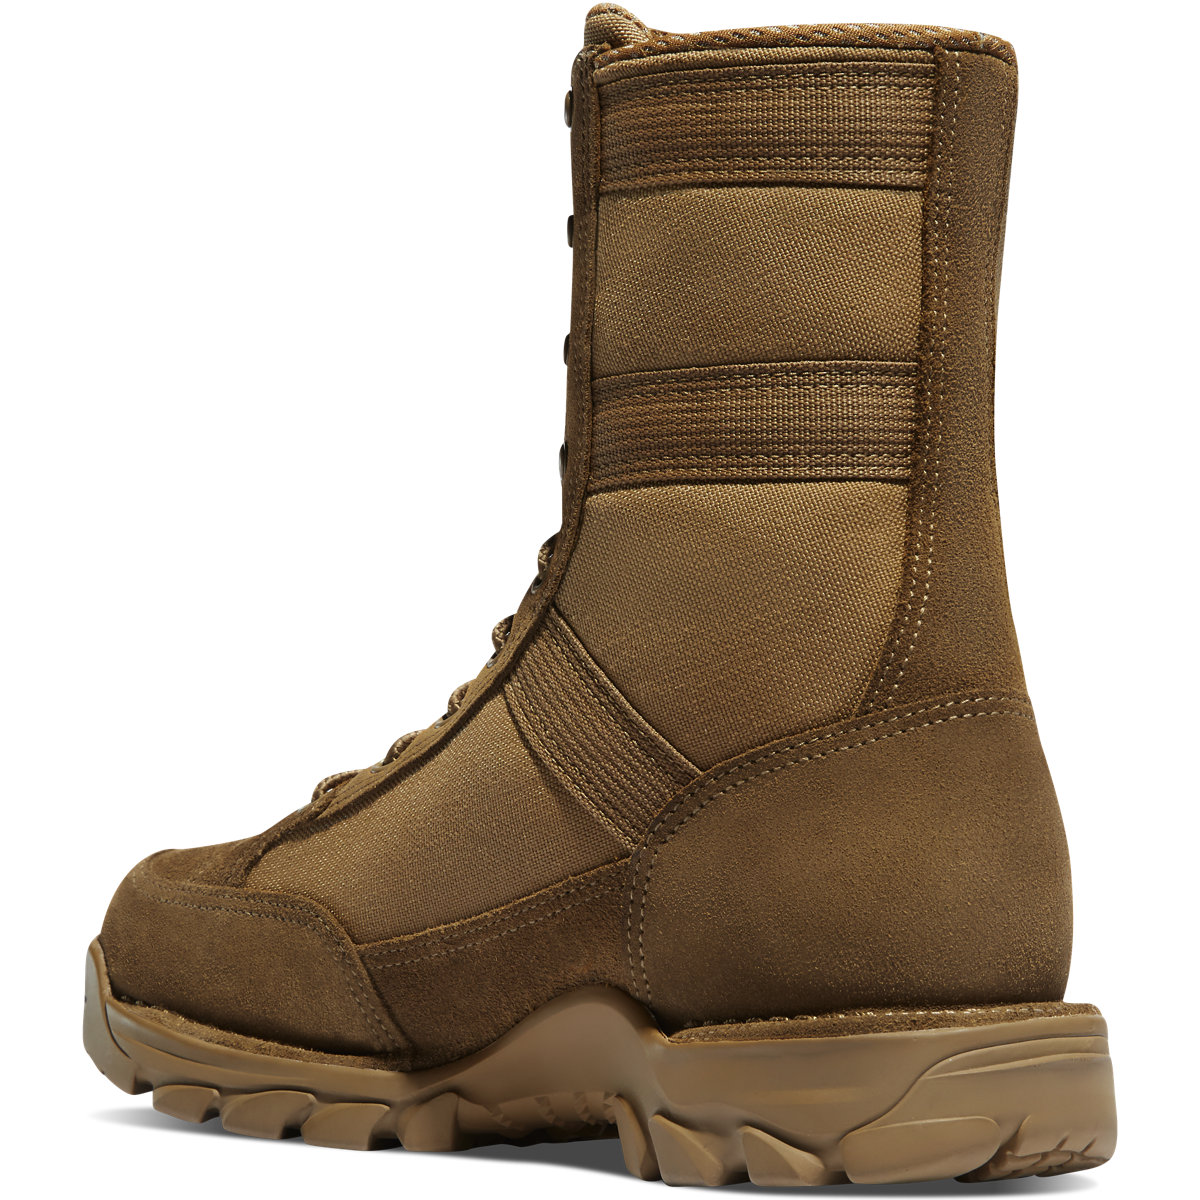 Danner - Rivot TFX Coyote Insulated 400G